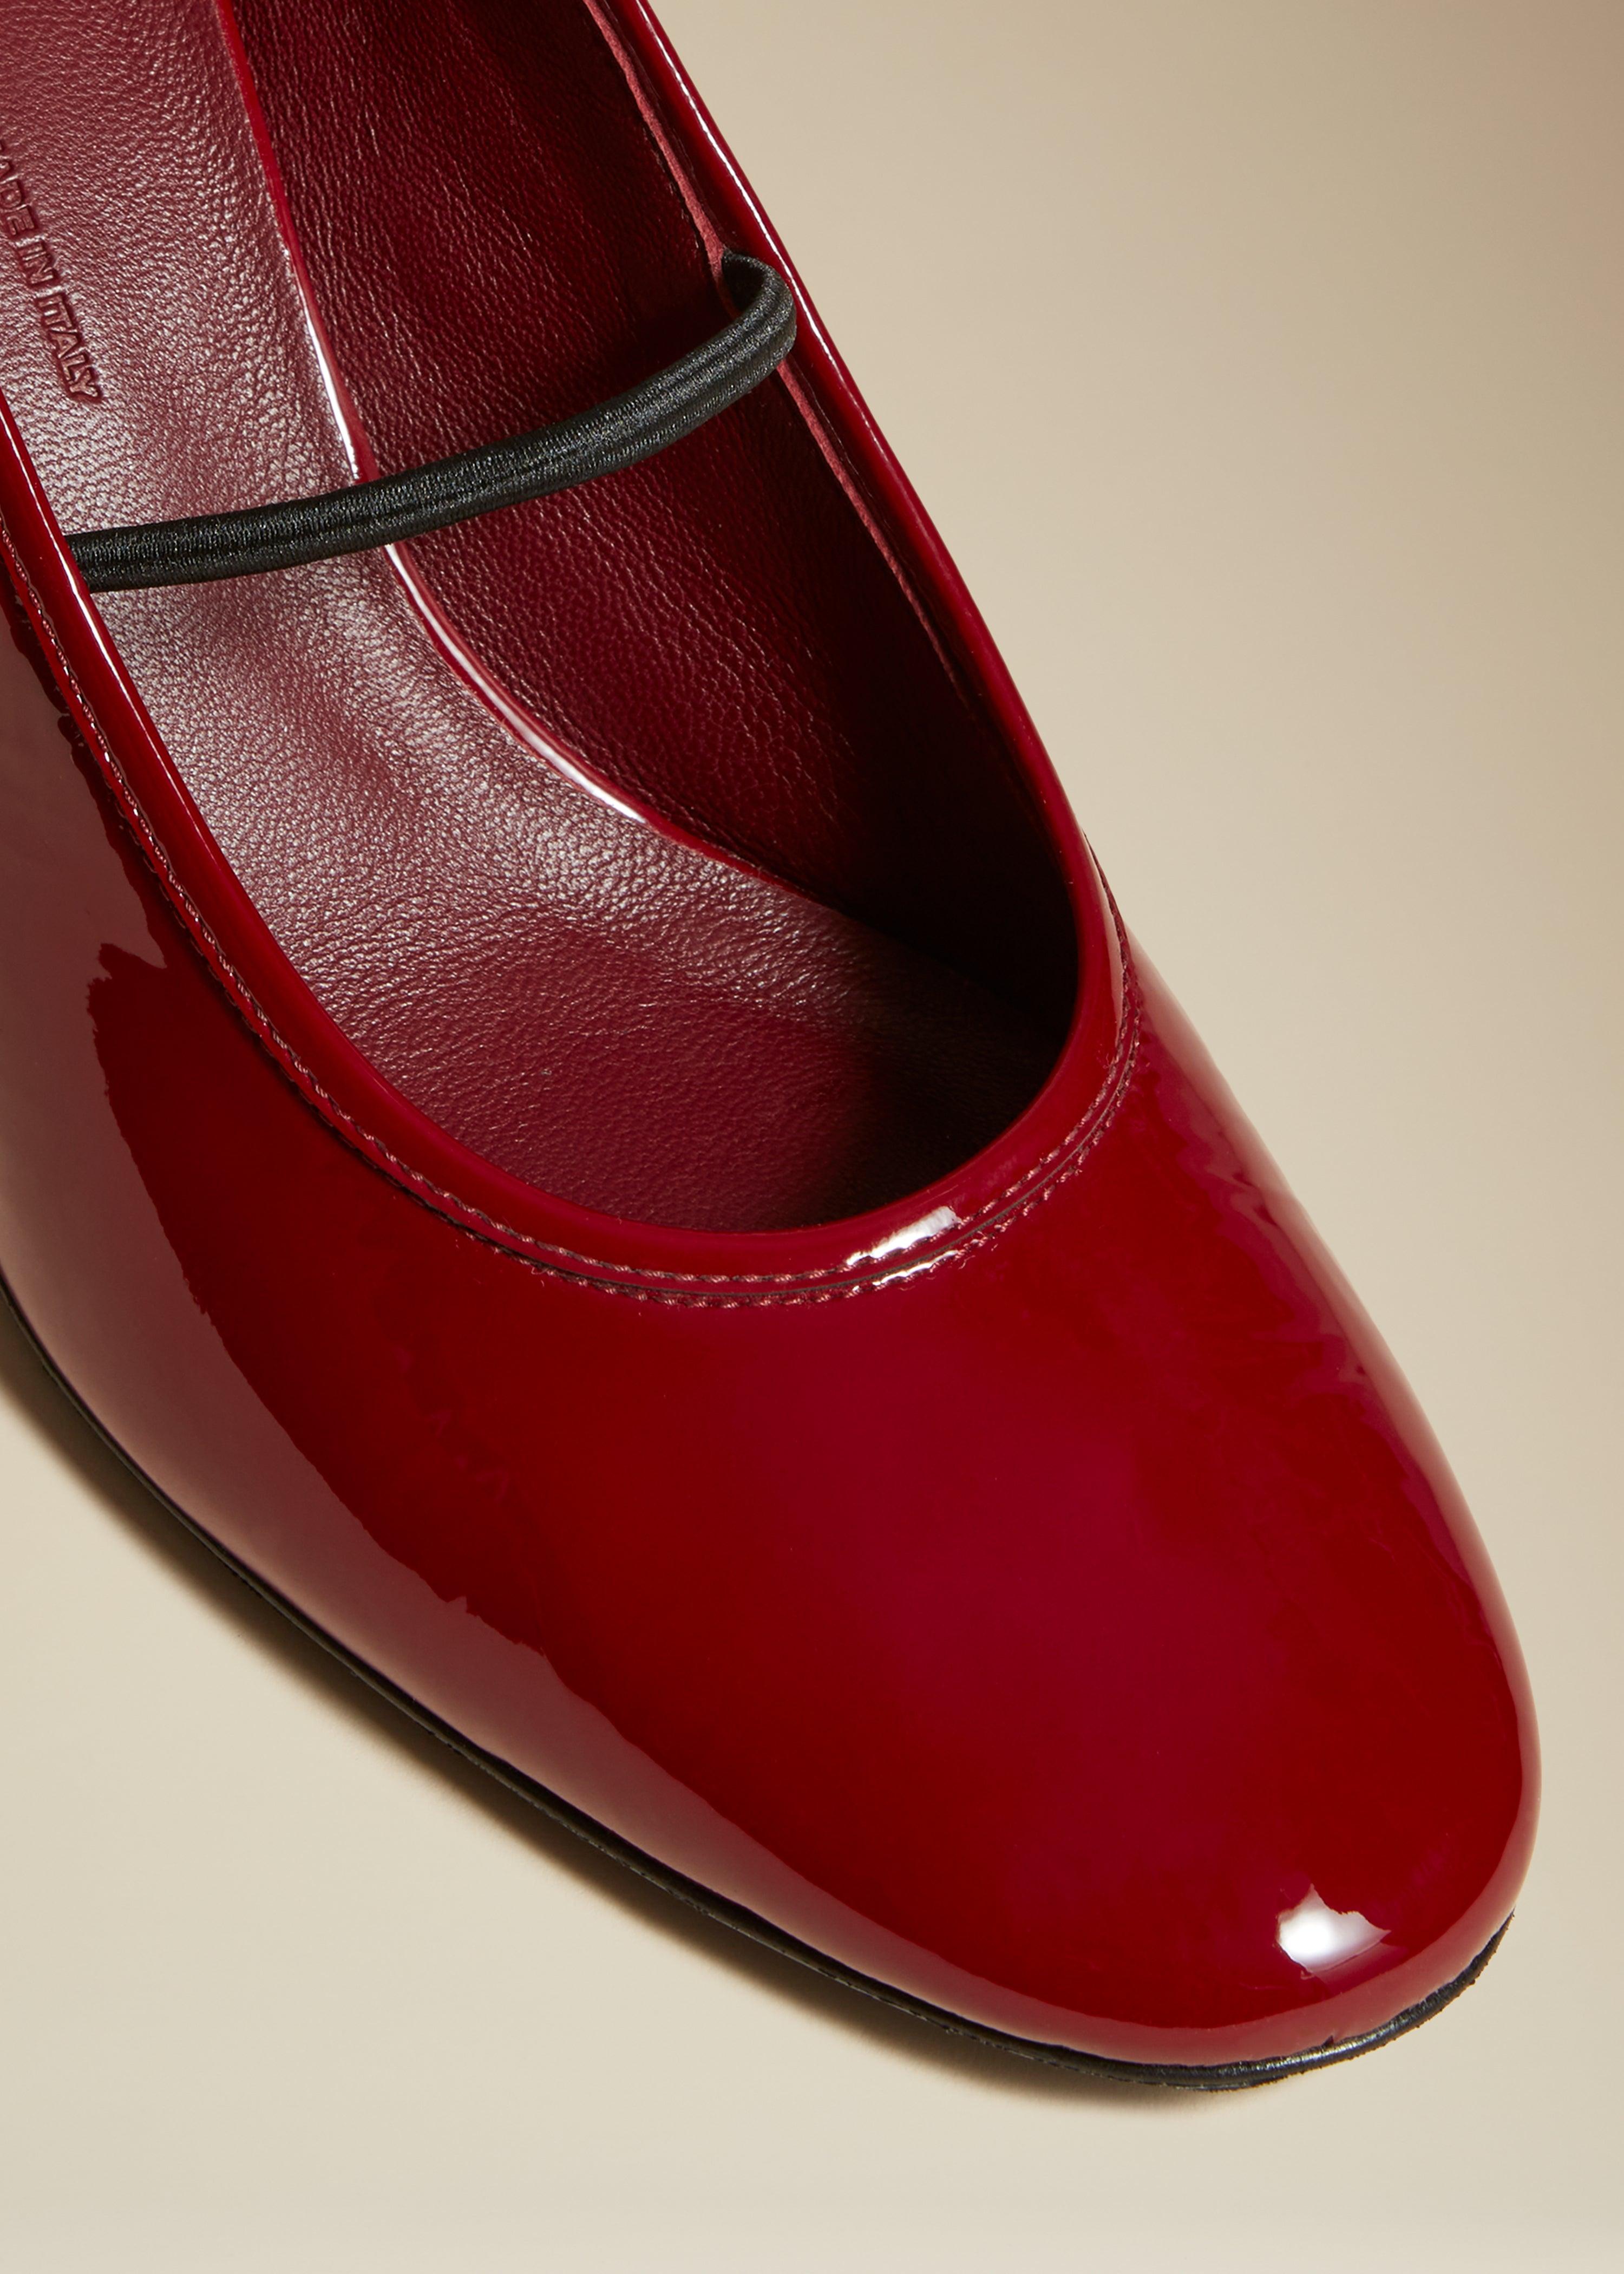 The Lorimer Pump in Deep Red Patent Leather - The Iconic Issue